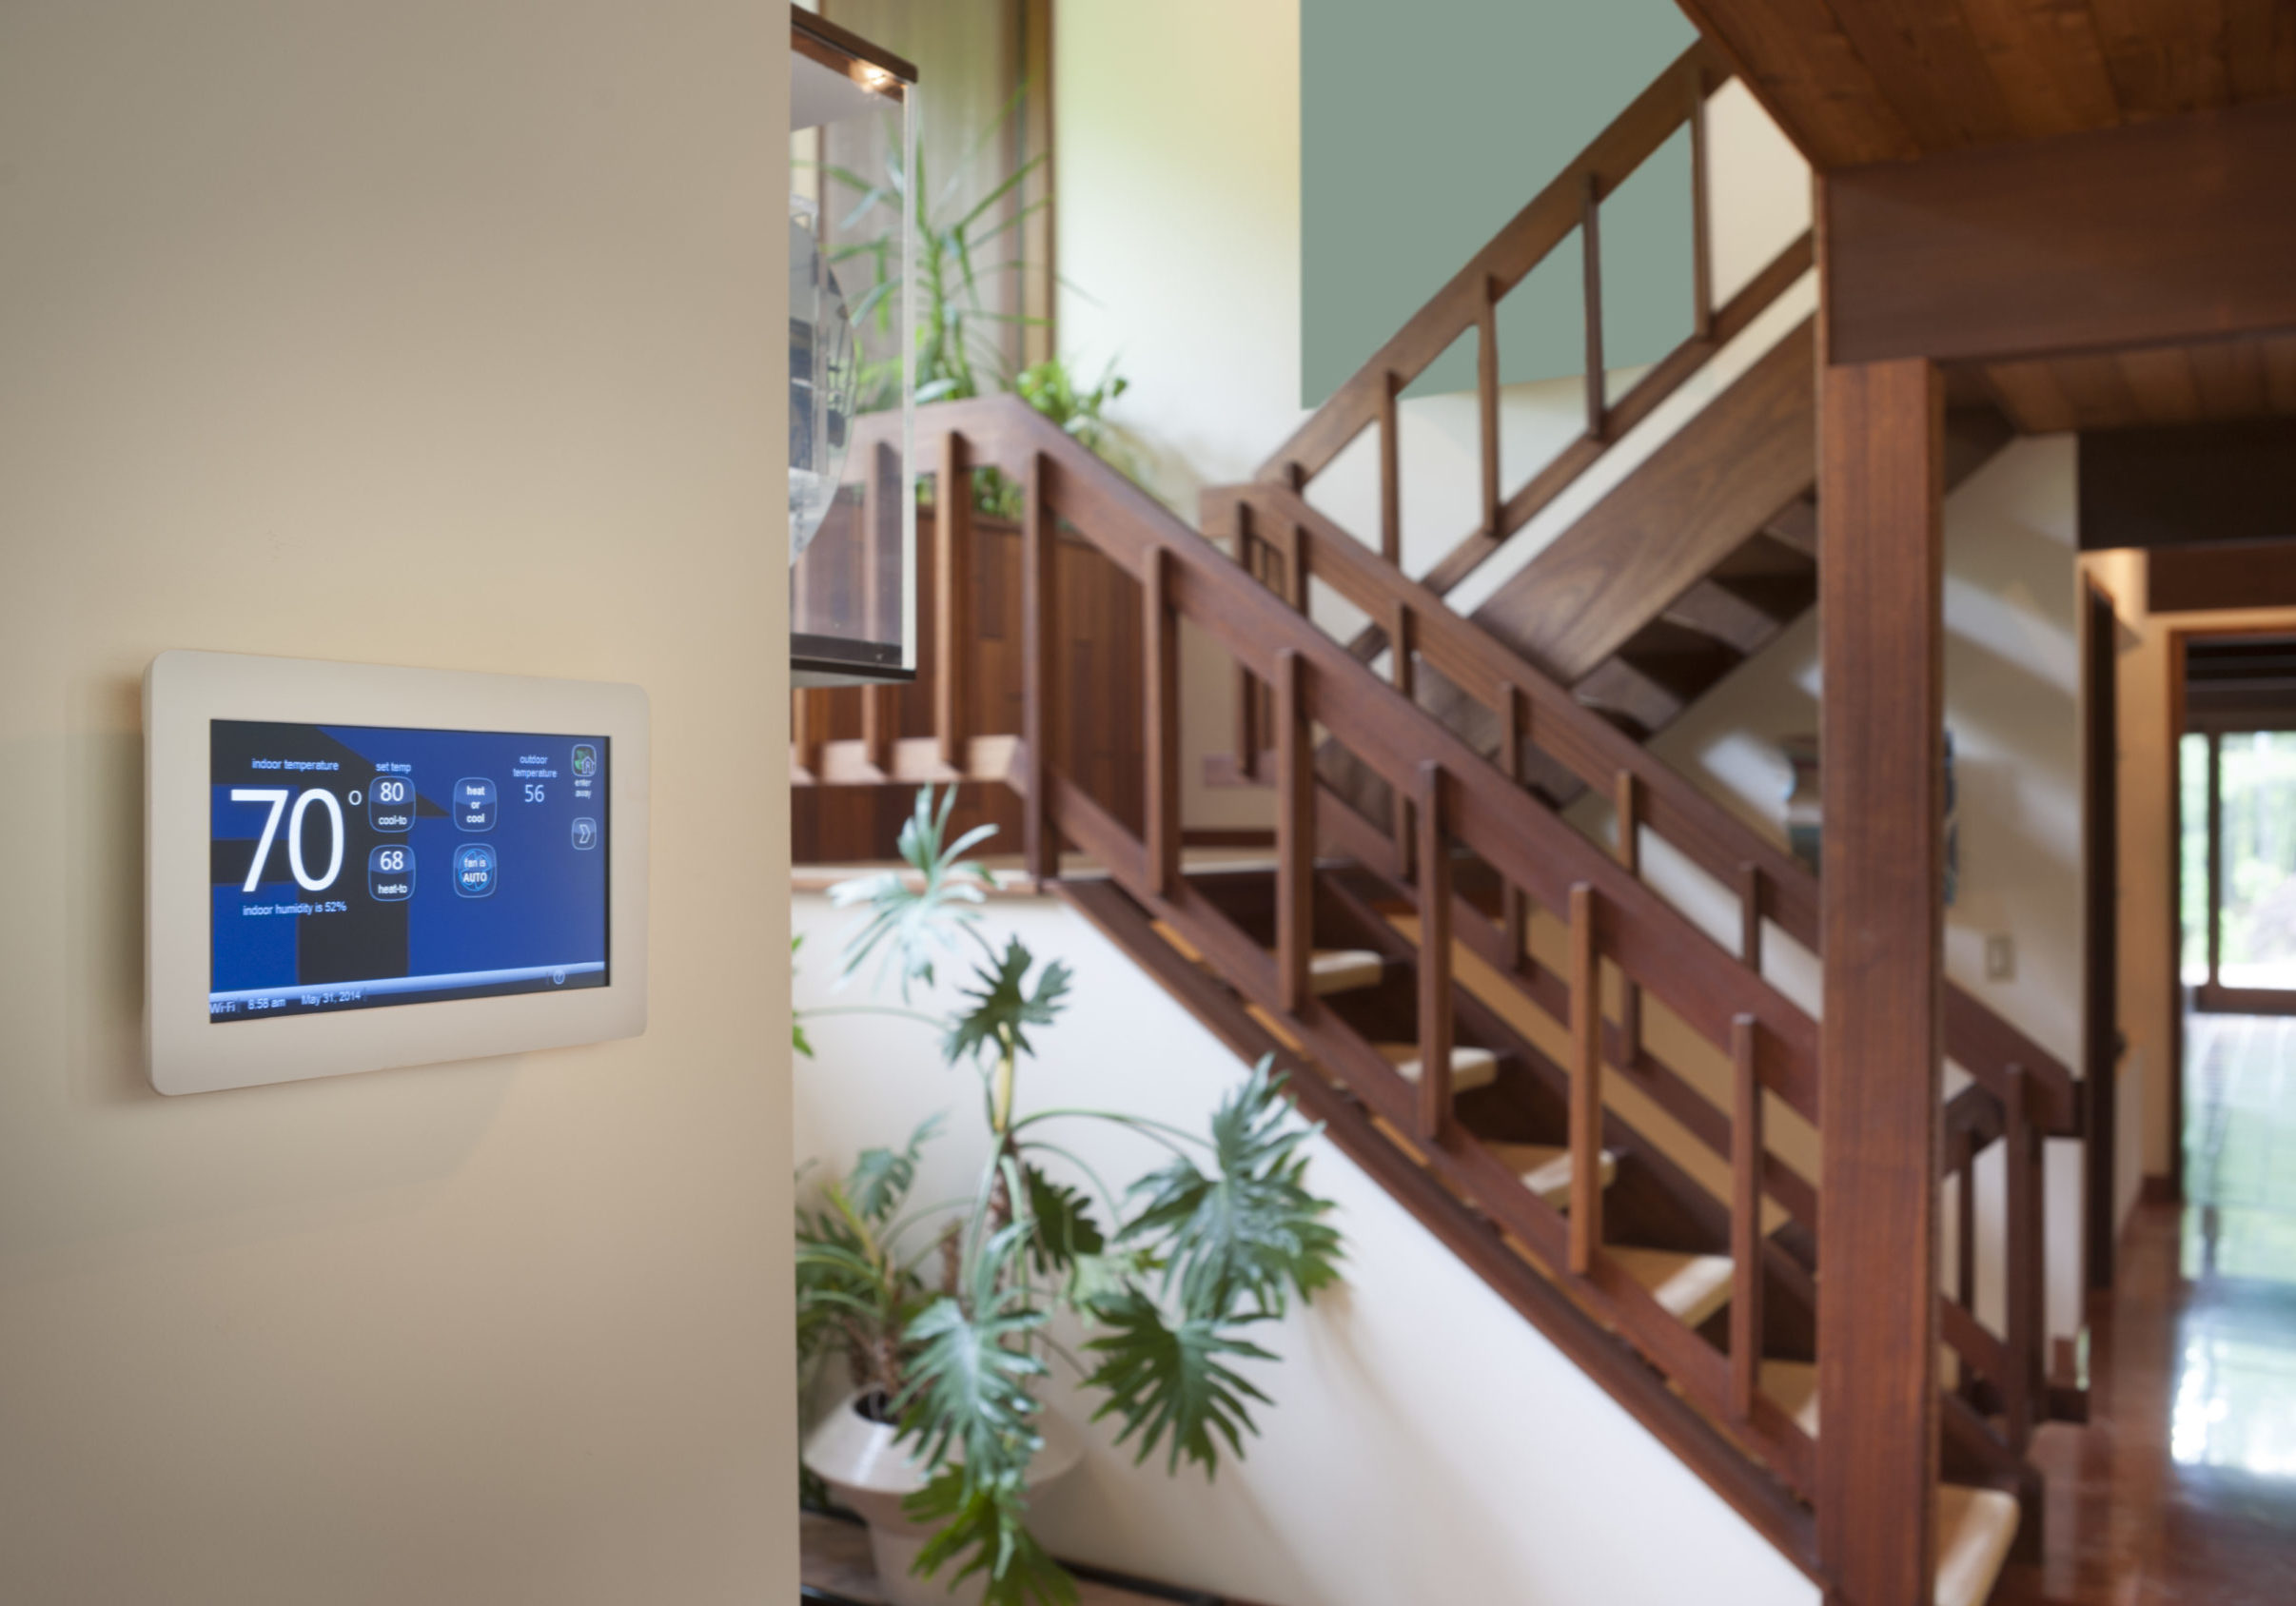 Smart wall energy control thermostat